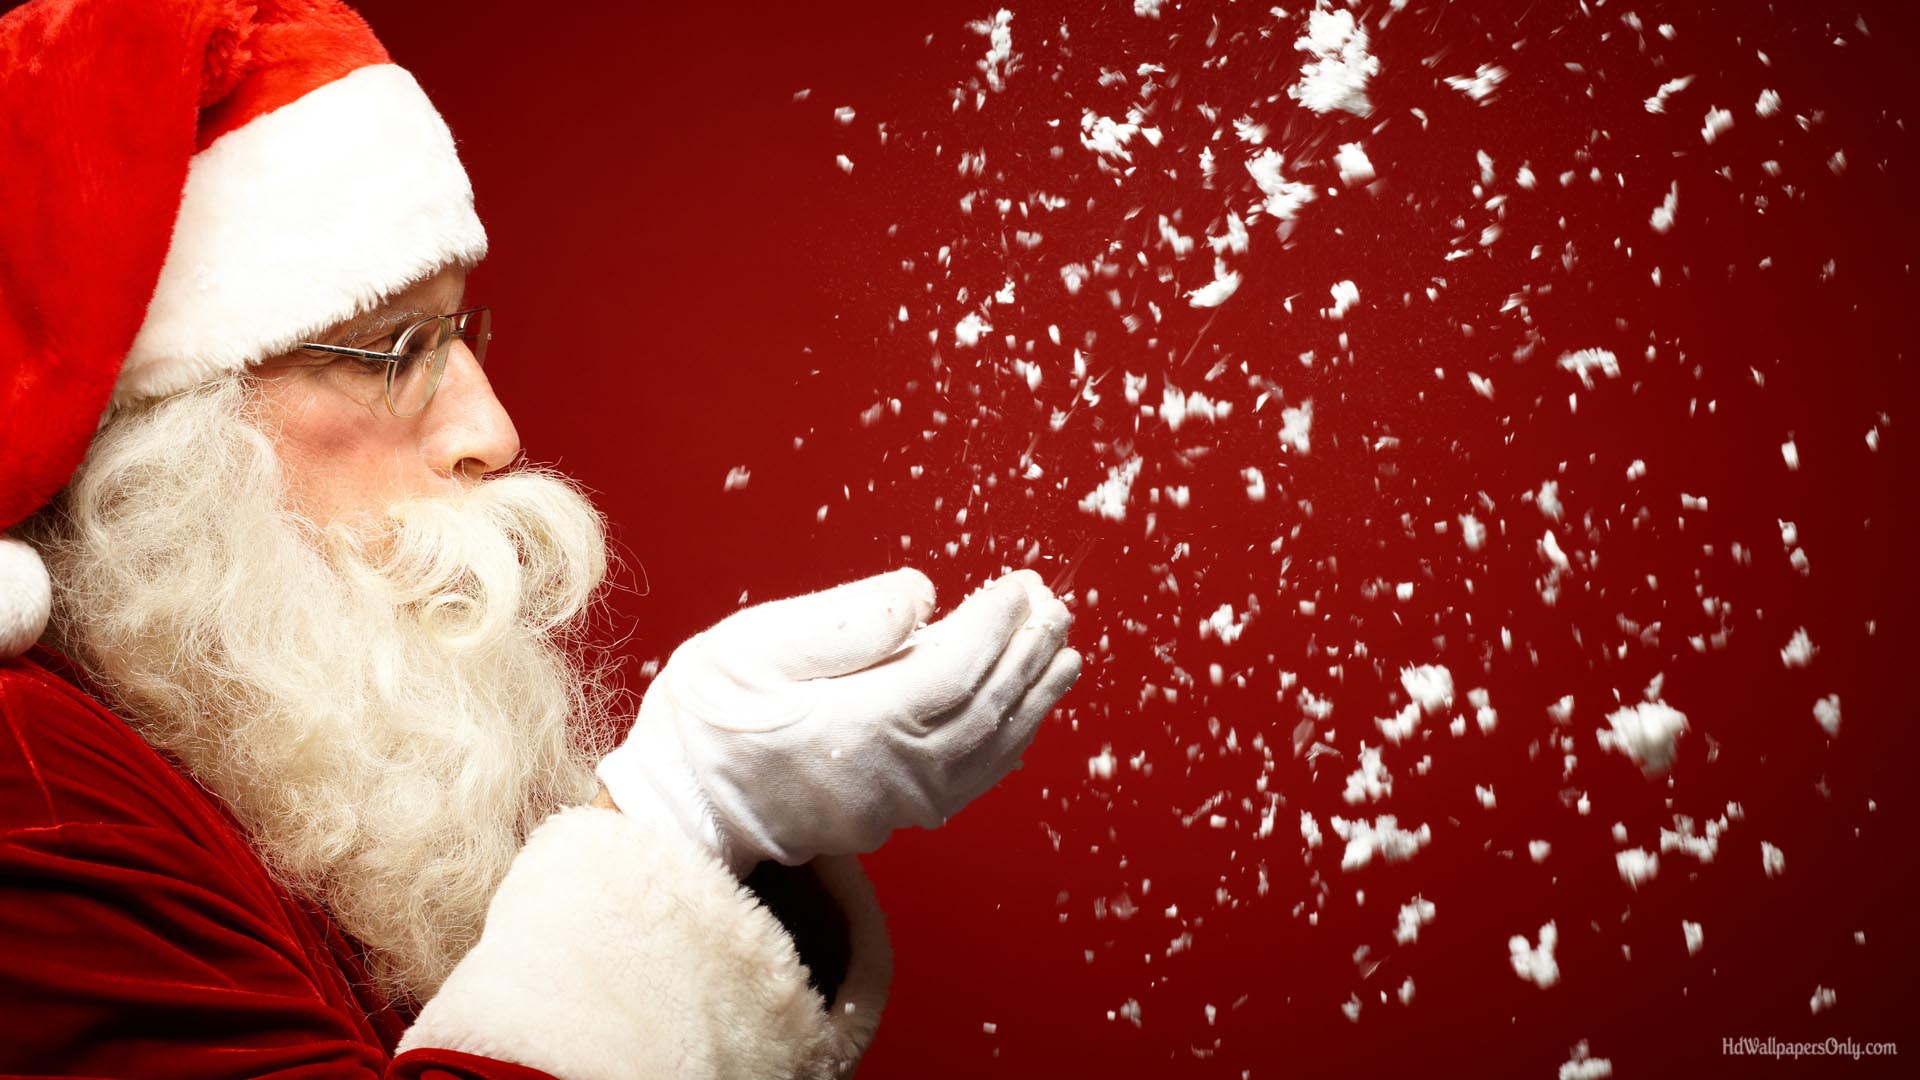 santa claus pictures hd 1080p hd wallpapers onlyhd wallpapers only